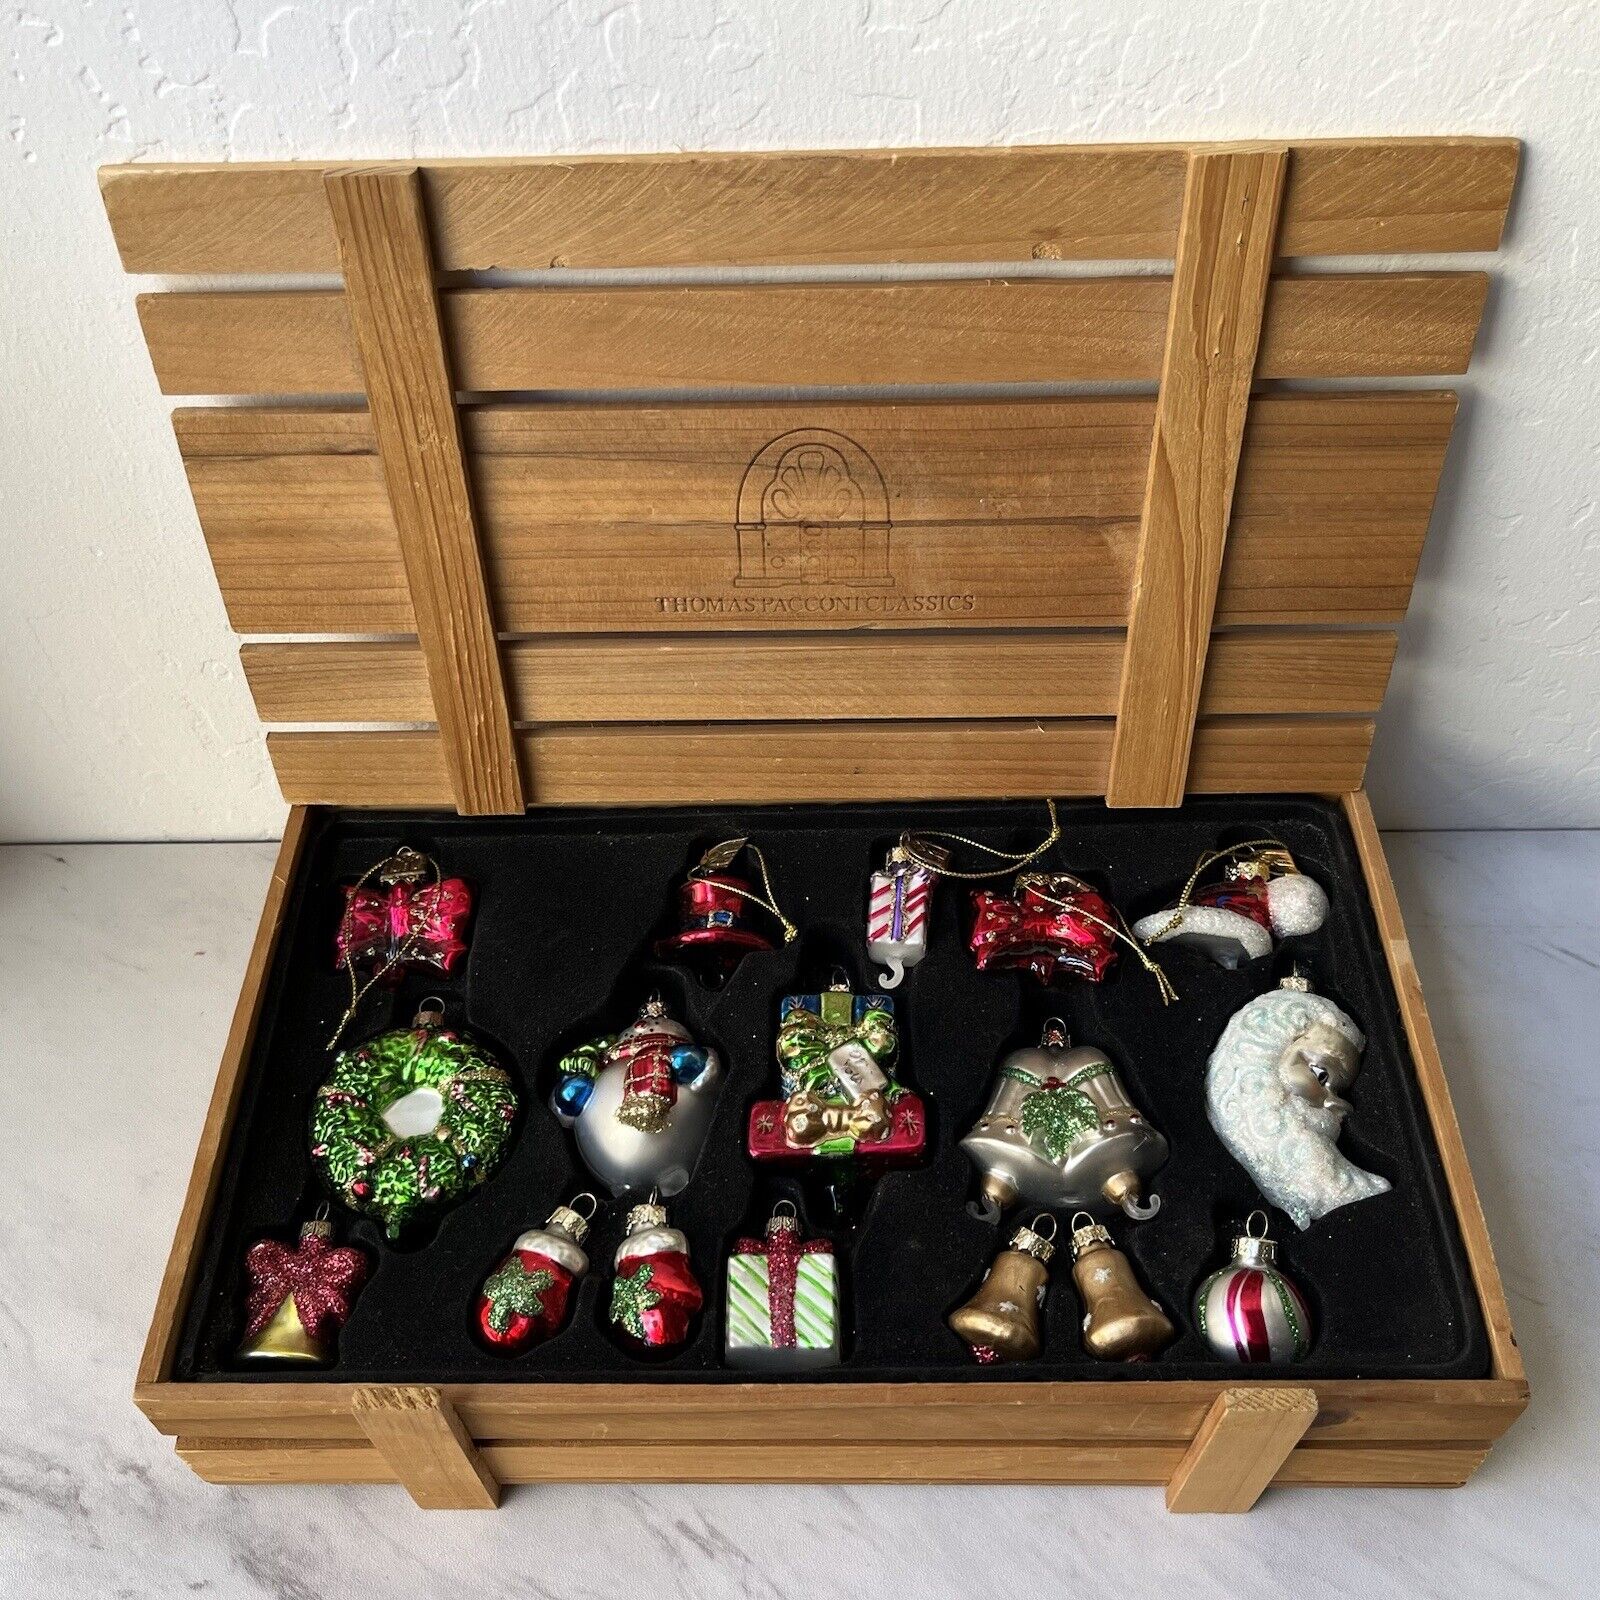 Thomas Pacconi Christmas Glass Ornaments Lot of 17 Holiday Set Wooden Box Crate